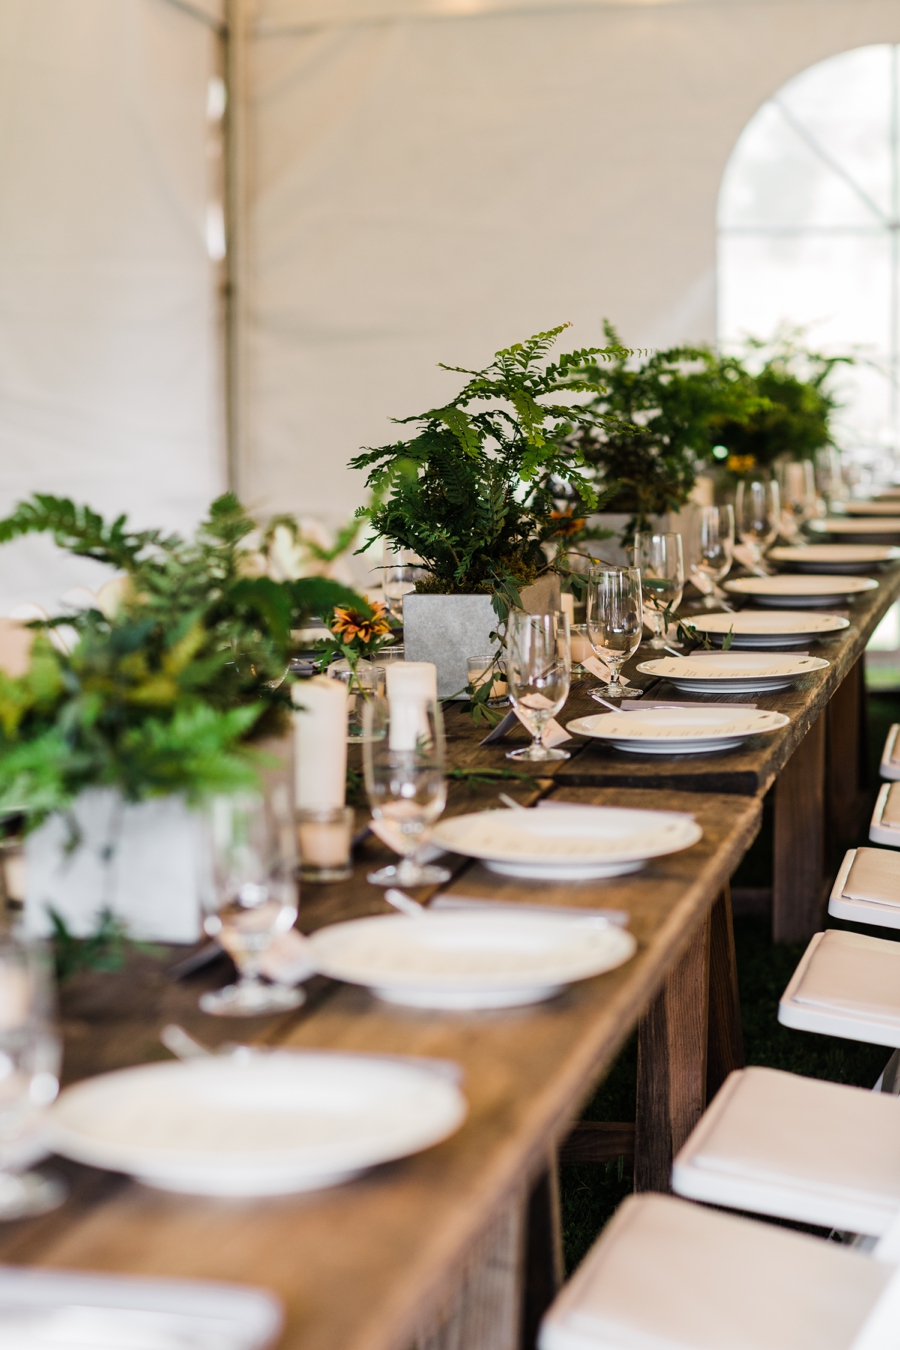 Live plant centerpieces at a wedding on Vashon Island photographed by outdoor wedding photographer Amy Galbraith